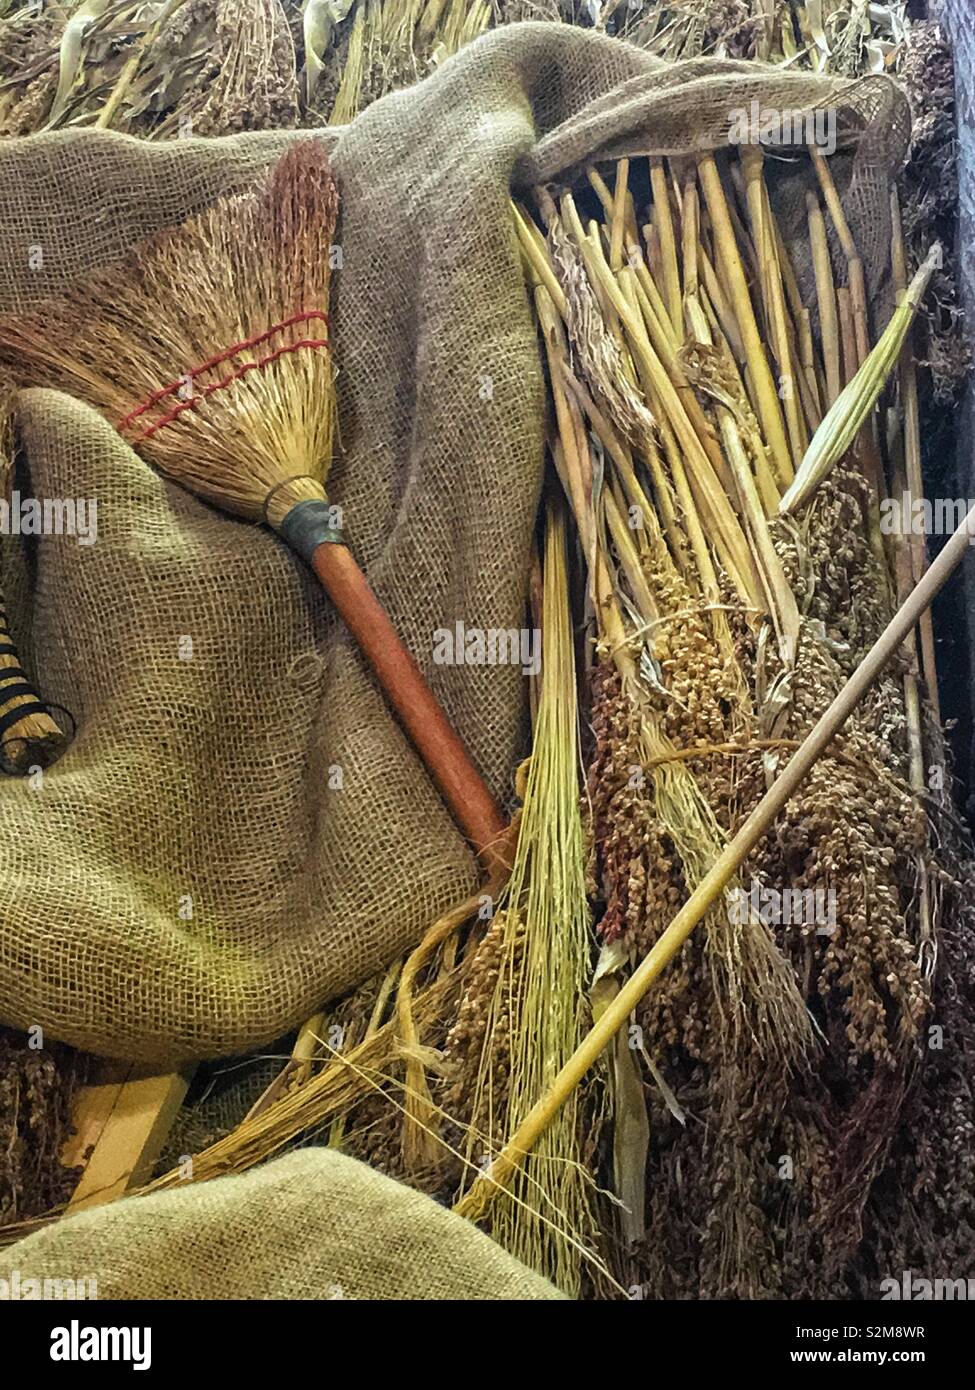 Pile of useful farm implements such as broom, shafts of wheat, and burlap blankets. Stock Photo